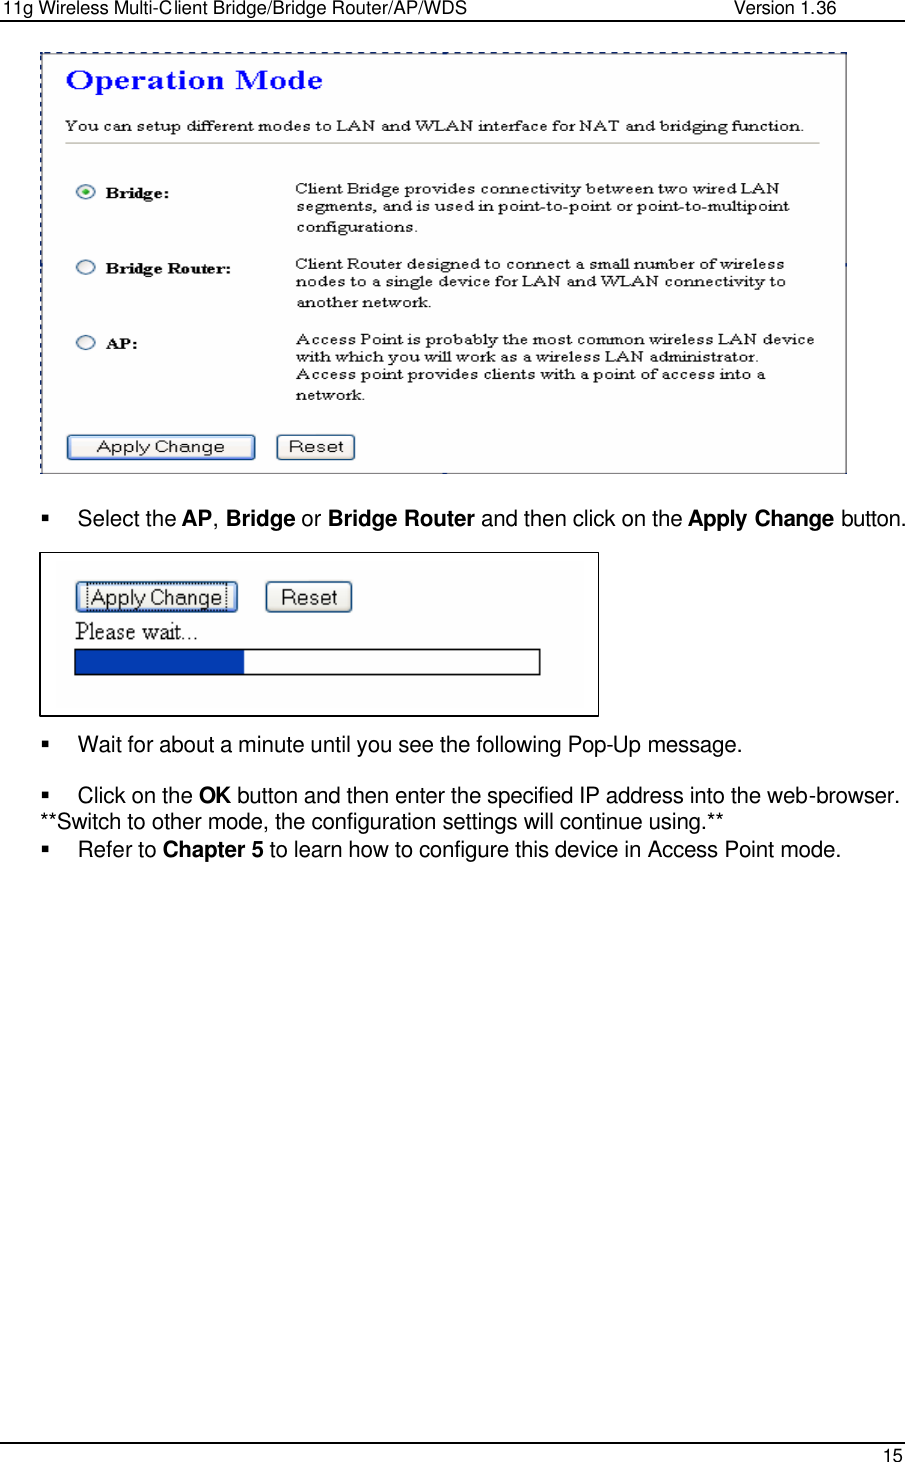 11g Wireless Multi-Client Bridge/Bridge Router/AP/WDS                                                   Version 1.36    15                  § Select the AP, Bridge or Bridge Router and then click on the Apply Change button.          § Wait for about a minute until you see the following Pop-Up message.   § Click on the OK button and then enter the specified IP address into the web-browser.  **Switch to other mode, the configuration settings will continue using.** § Refer to Chapter 5 to learn how to configure this device in Access Point mode.                   